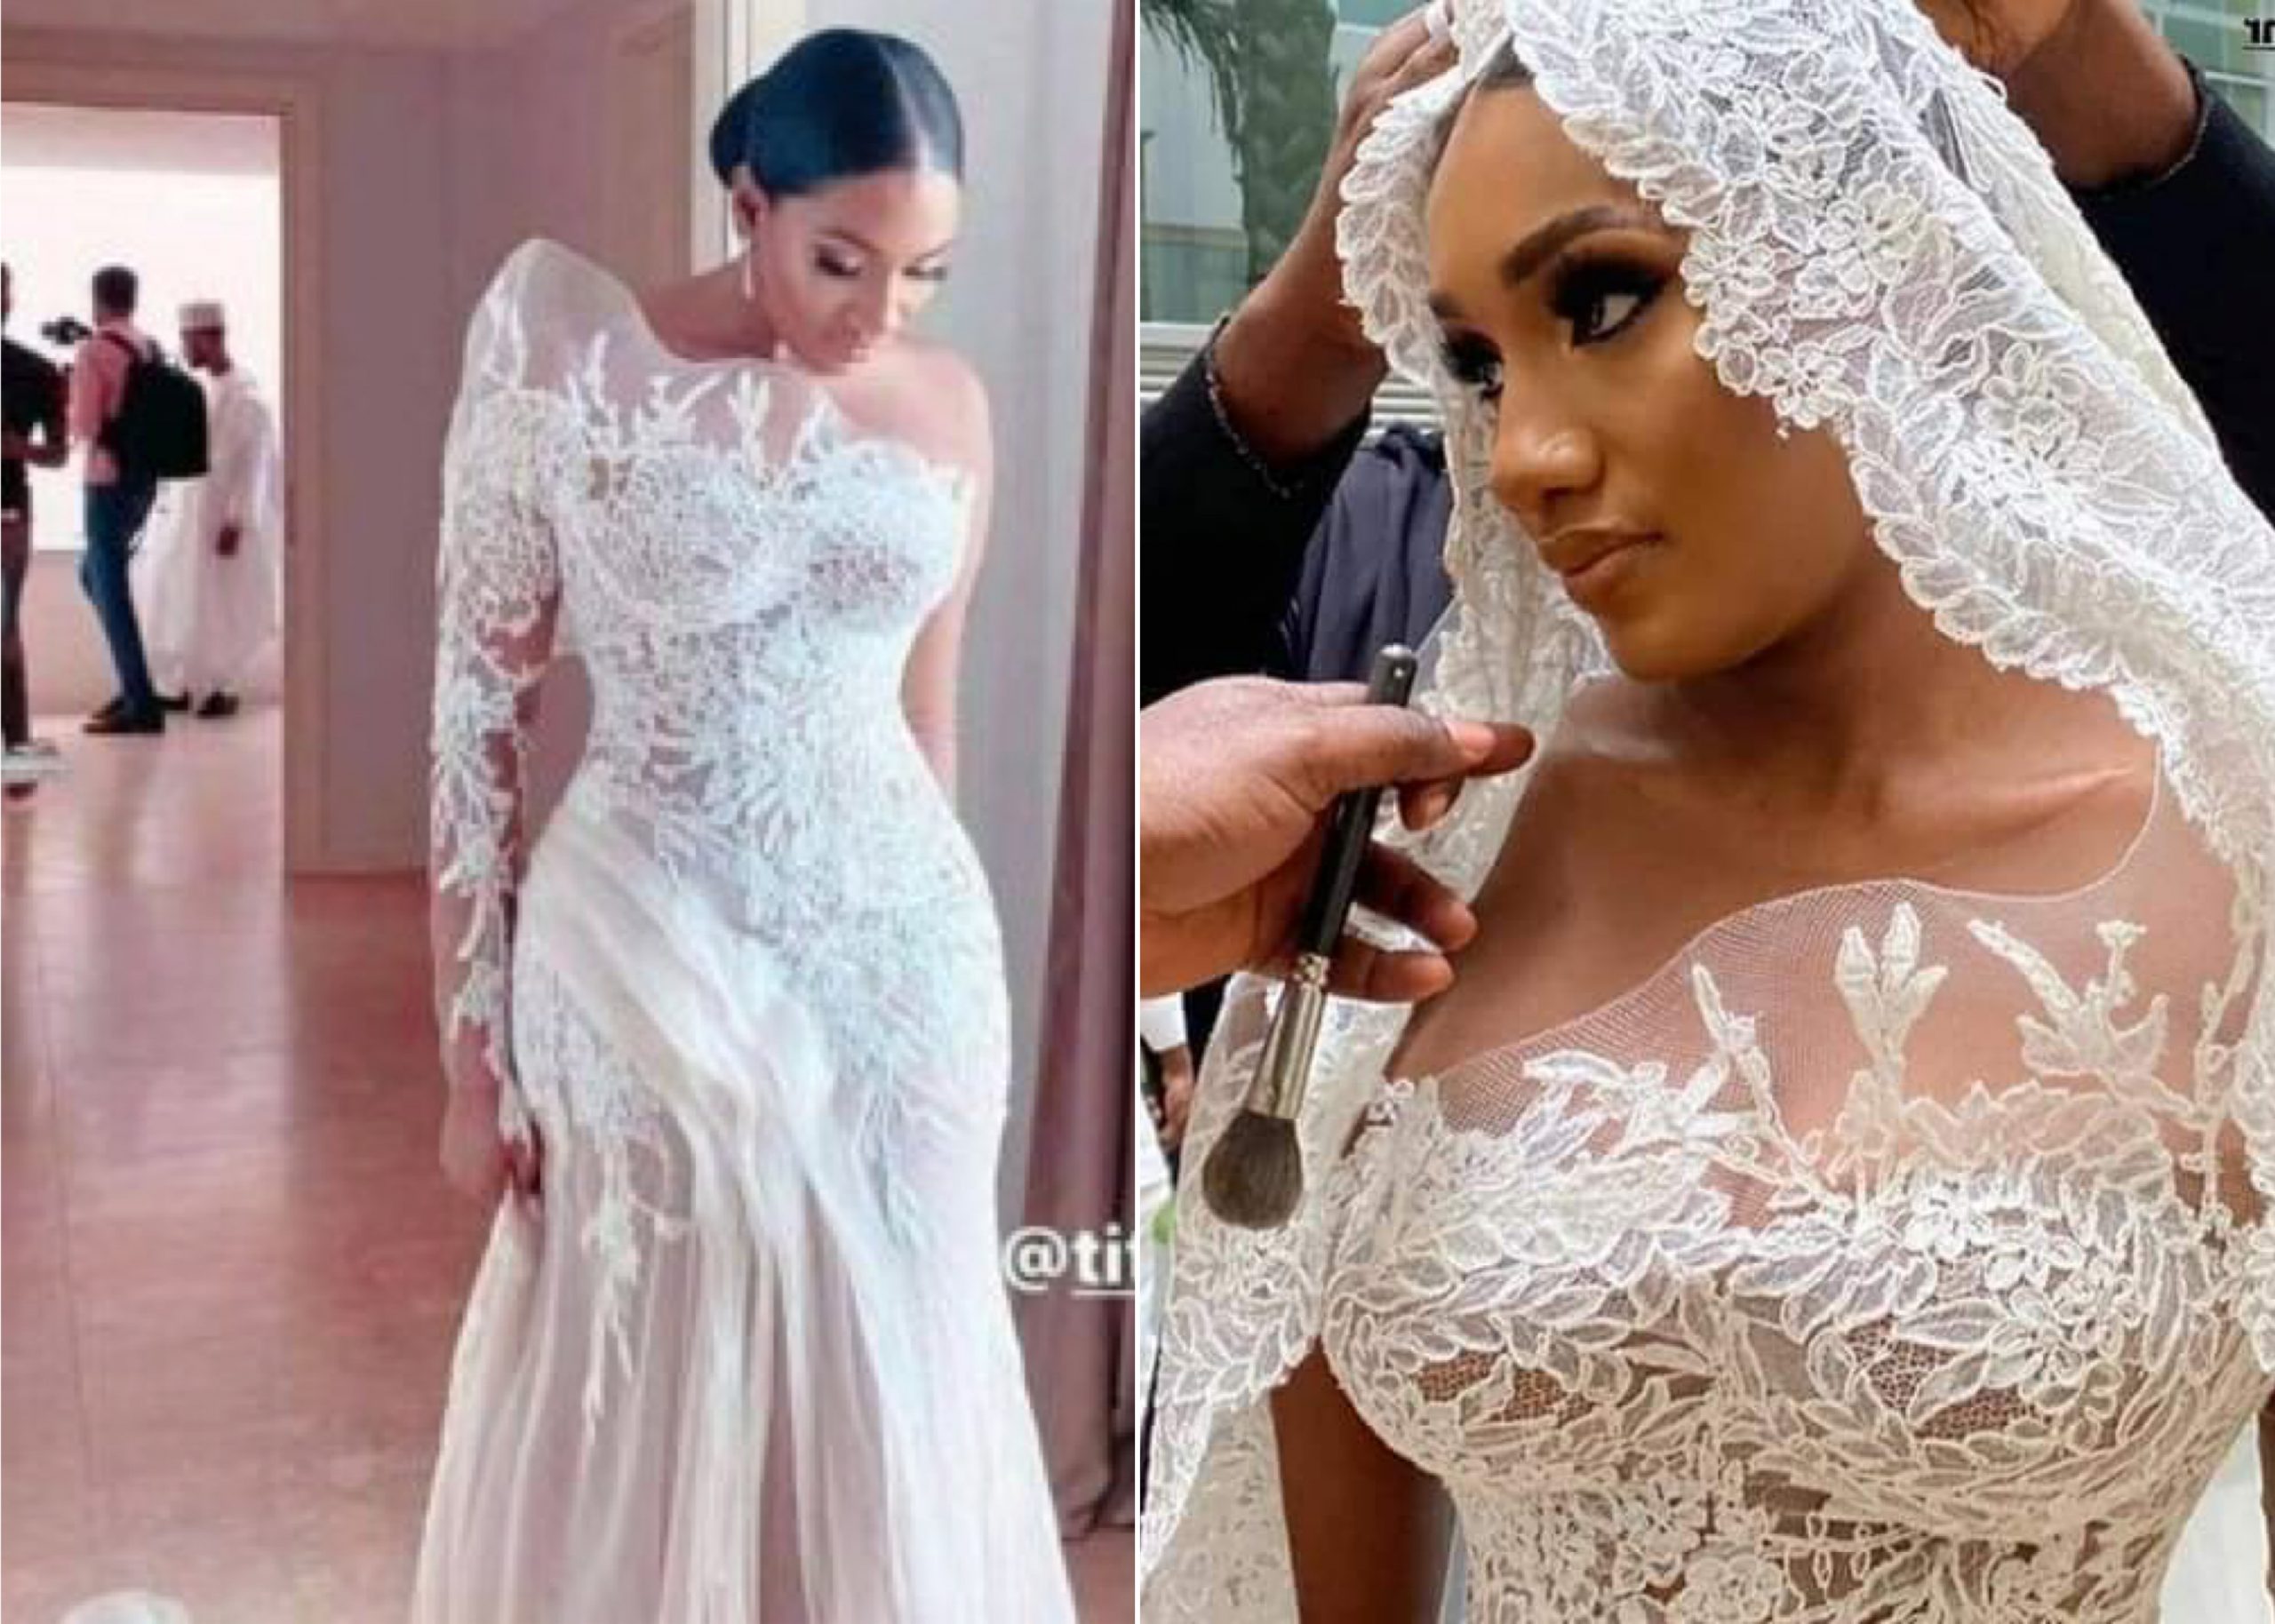 Nuhu Ribadu’s Daughter Apologises To Friends, Family For Choice Of Wedding Dress Following Backlash